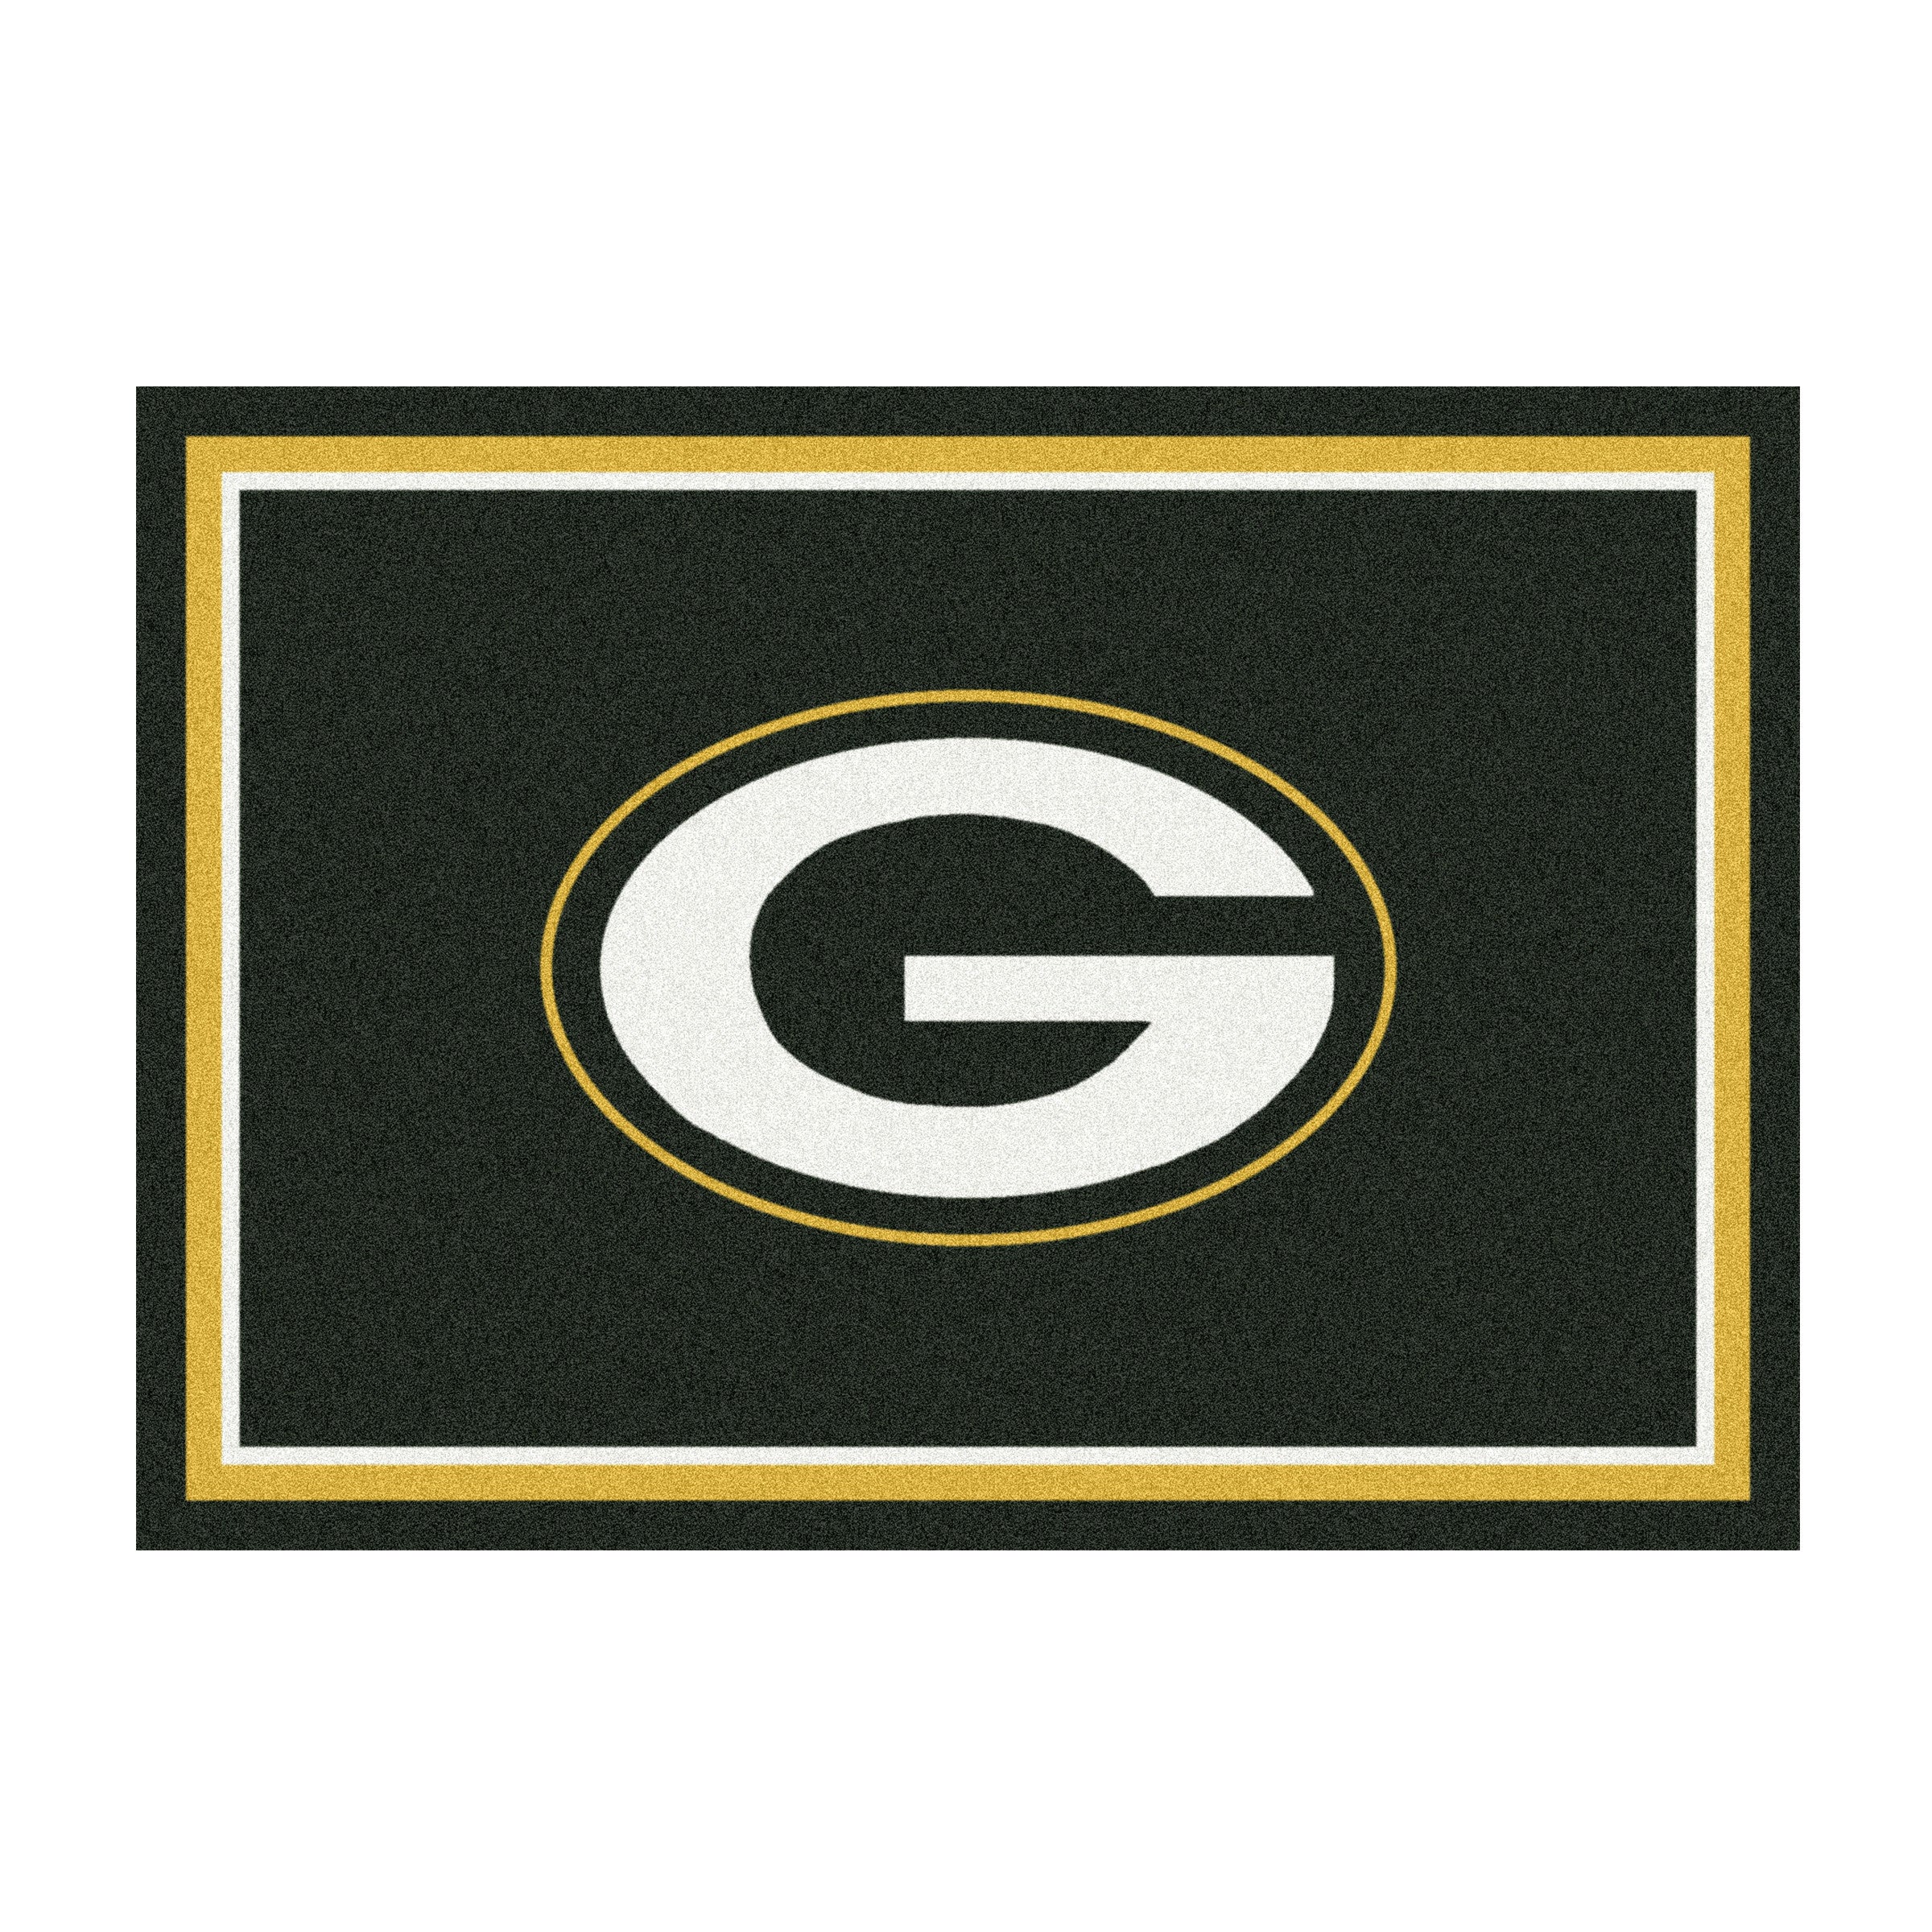 Imperial Green Bay Packers 6'x8' Spirit Rug